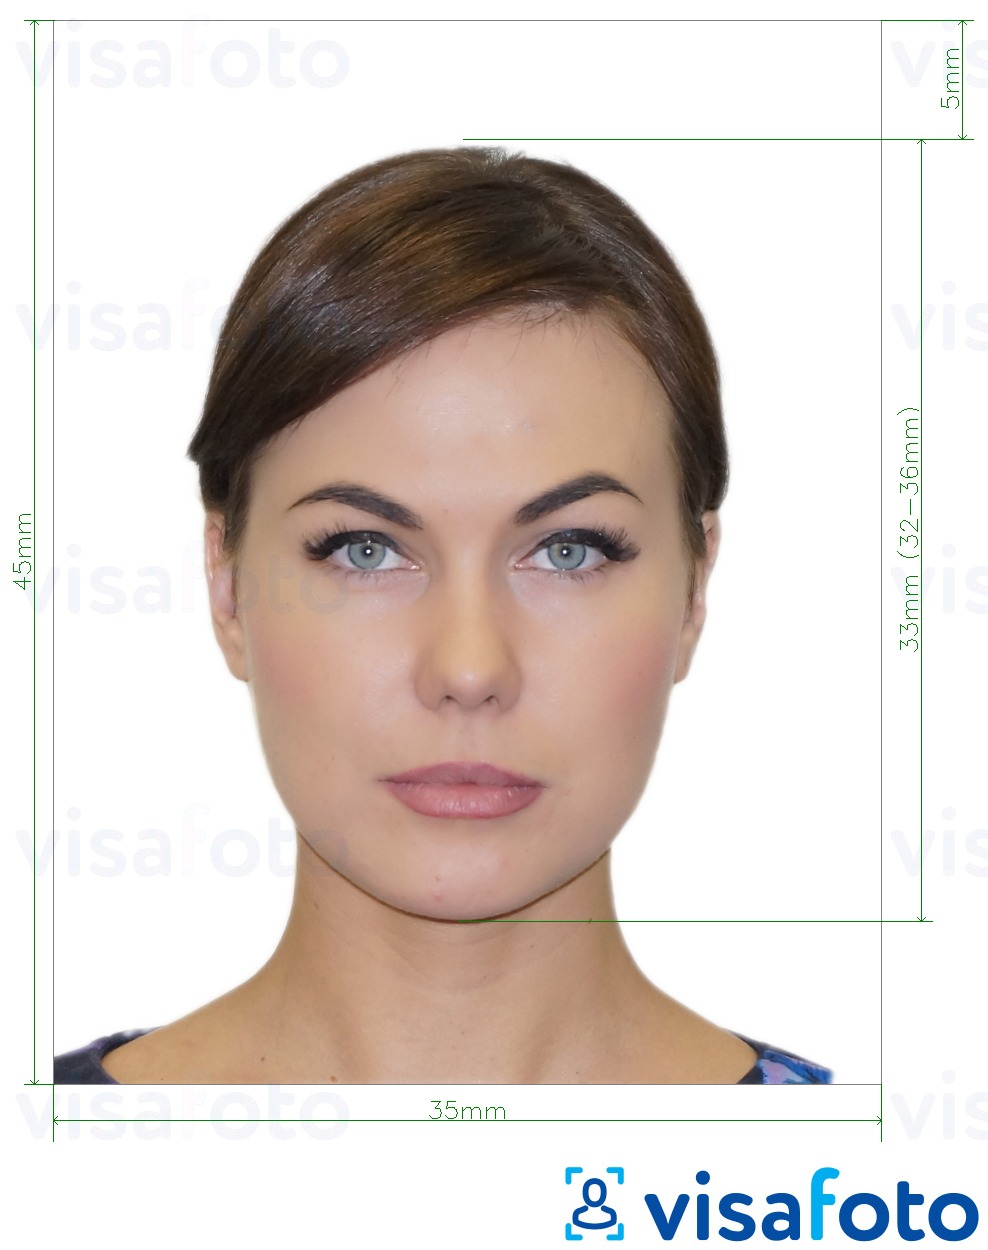 Example of photo for Russia International Passport offline, 35x45 mm with exact size specification